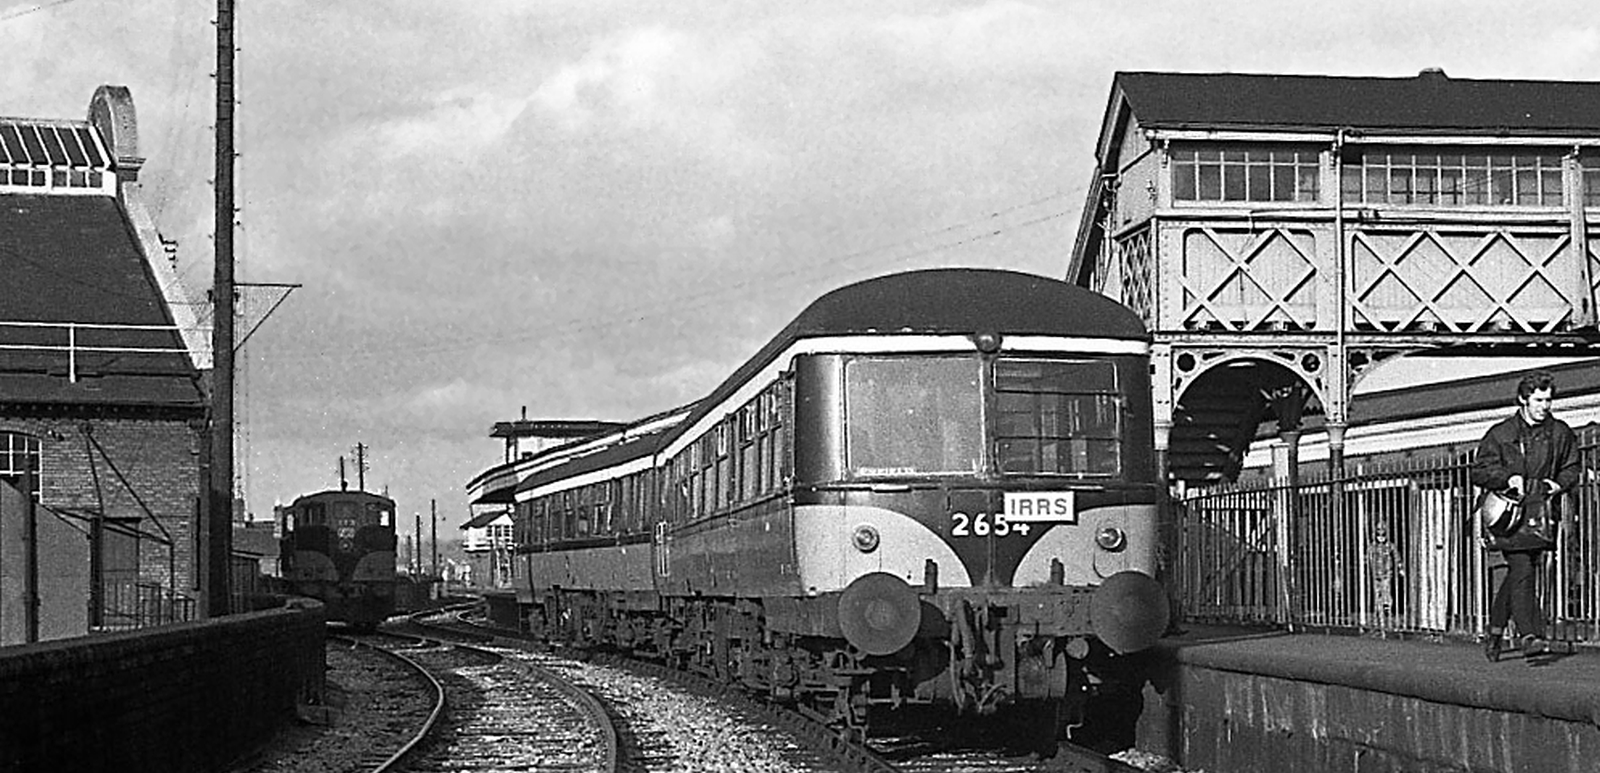 2654 in April 1975 at Connolly Station, Dublin